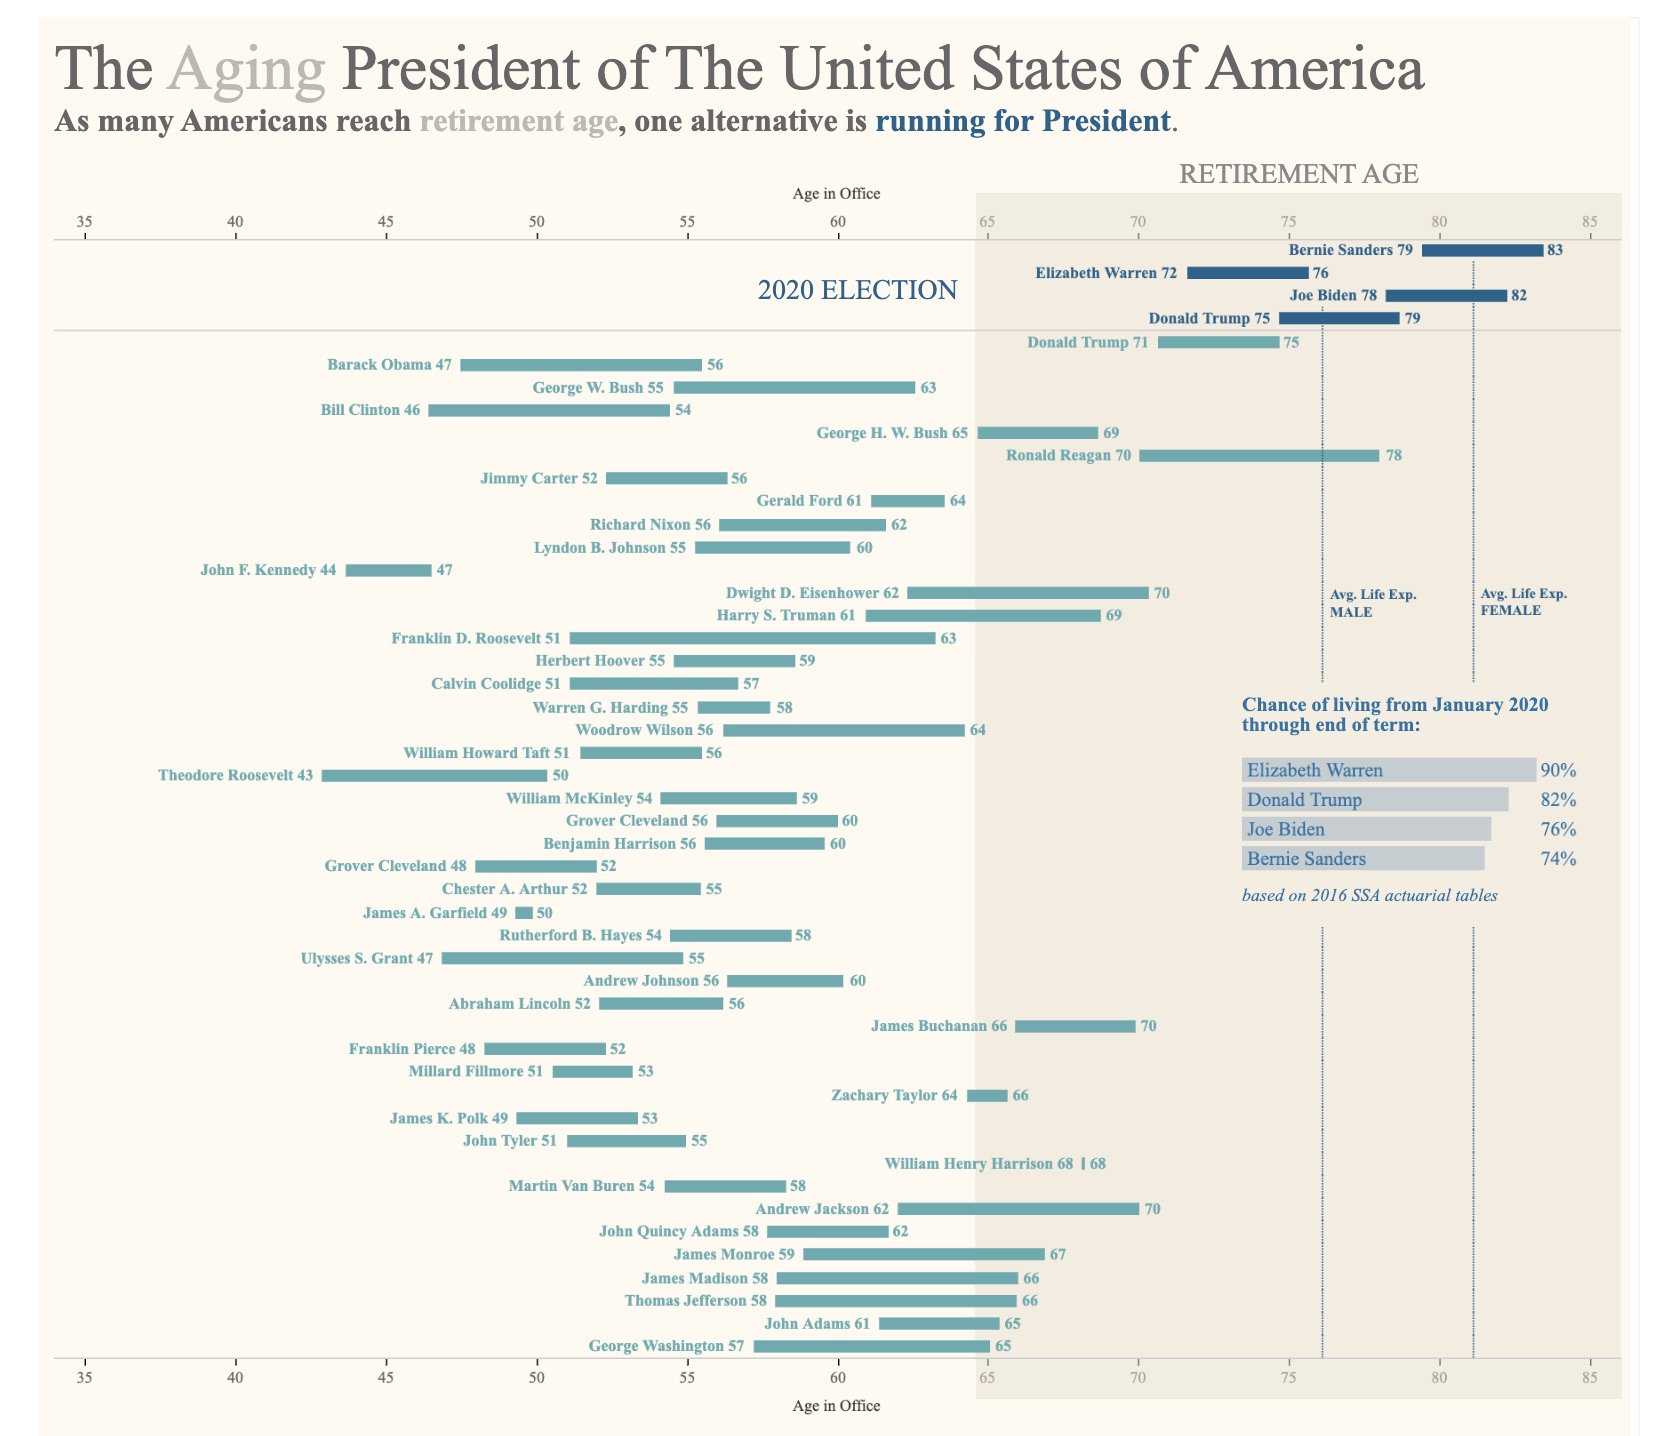 Each presidential term is
shown as a horizontal bar, and they are all stacked, so you can see that Ronald Reagan, for example, was older when
he took office than all but Dwight D. Eisenhower and Andrew Jackson were when they left office. Donald Trump, Bernie Sanders, Joe Biden,
and Elizabeth Warren would all finish a 2021-25 term older than Reagan was when he finished; Biden and Sanders would also start
their term older than he was when he finished.